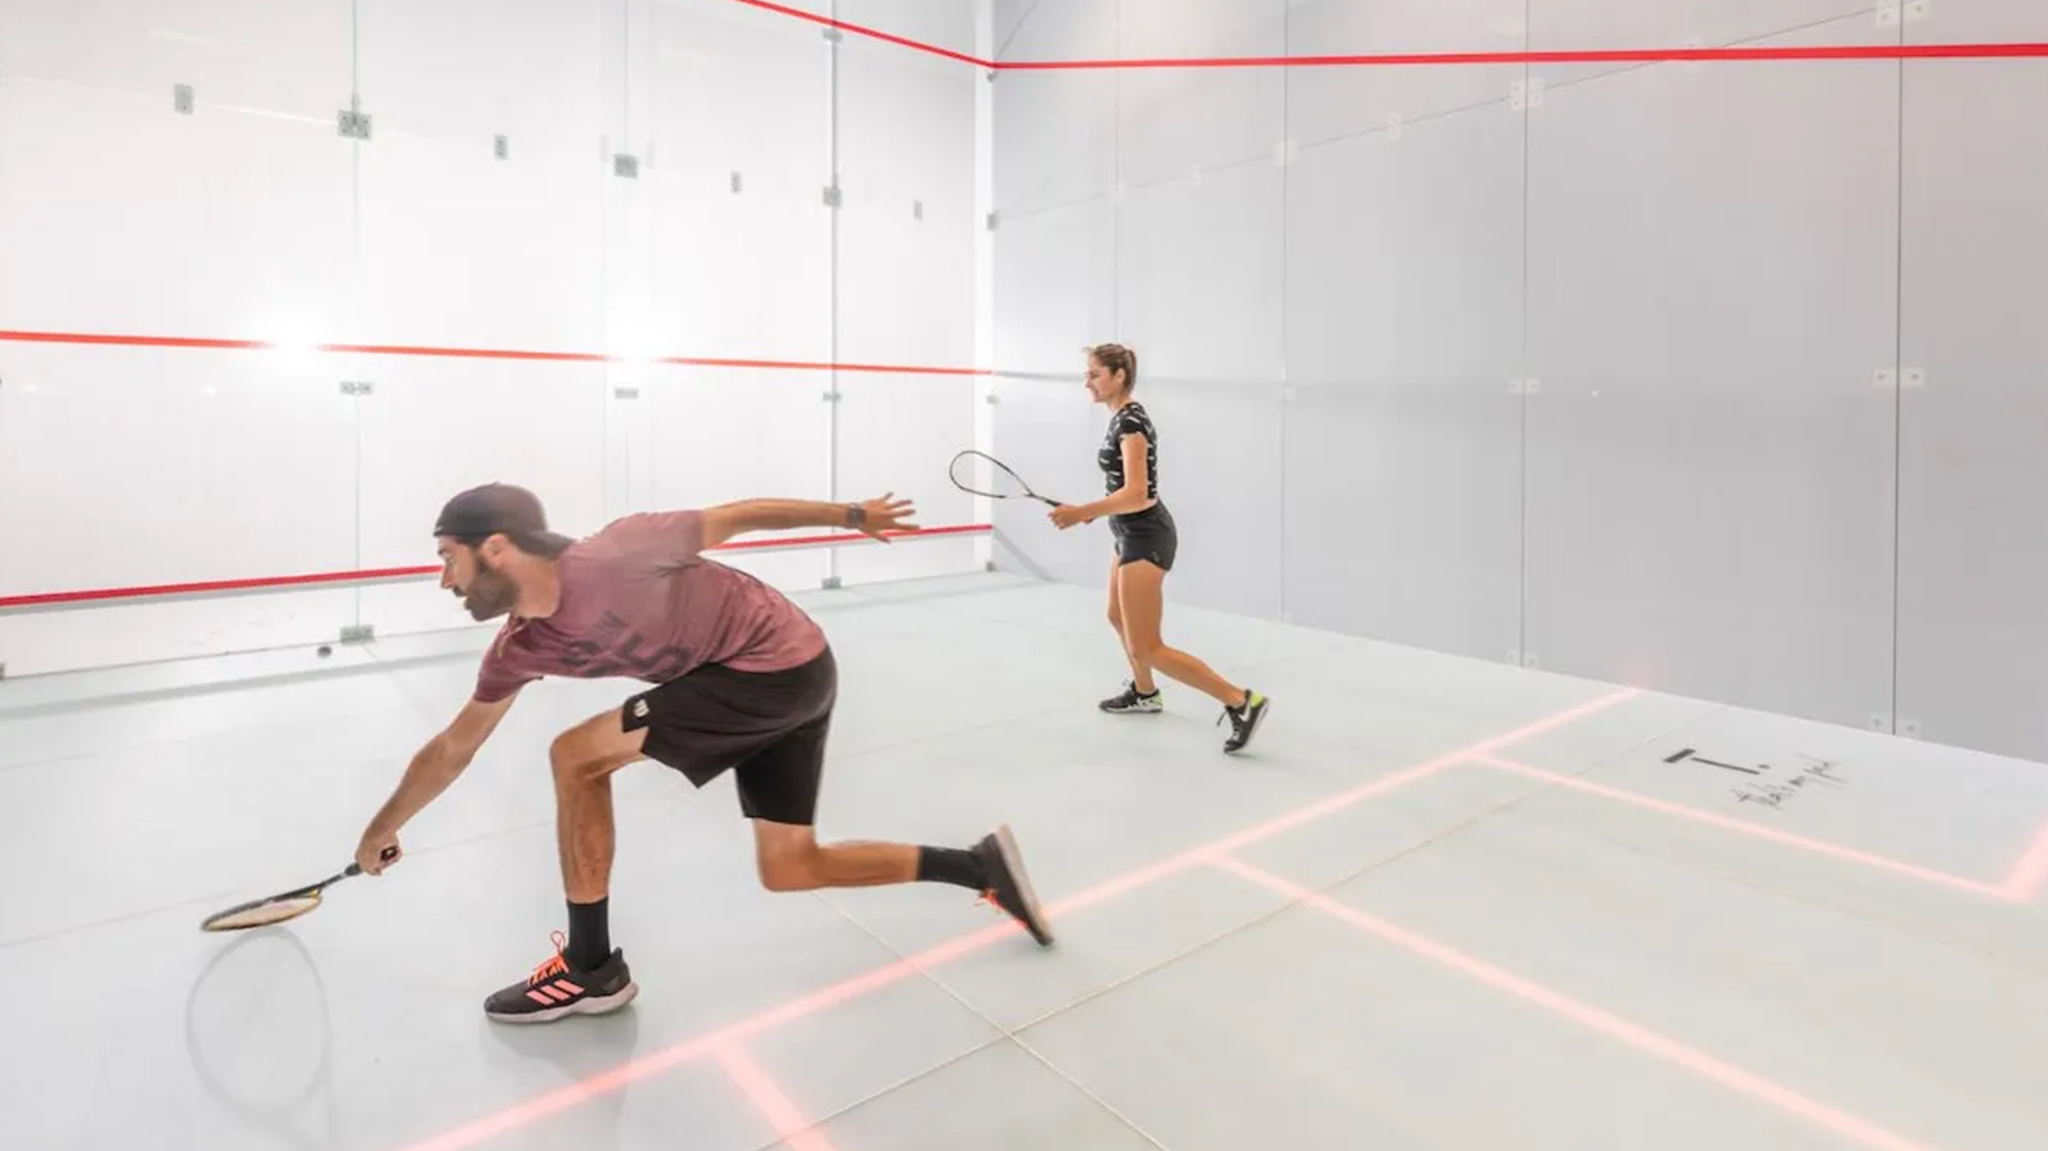 https://syndika.co/wp-content/uploads/2023/09/Tpoint-The-Worlds-First-Smart-Outdoor-Squash-Court4.jpg